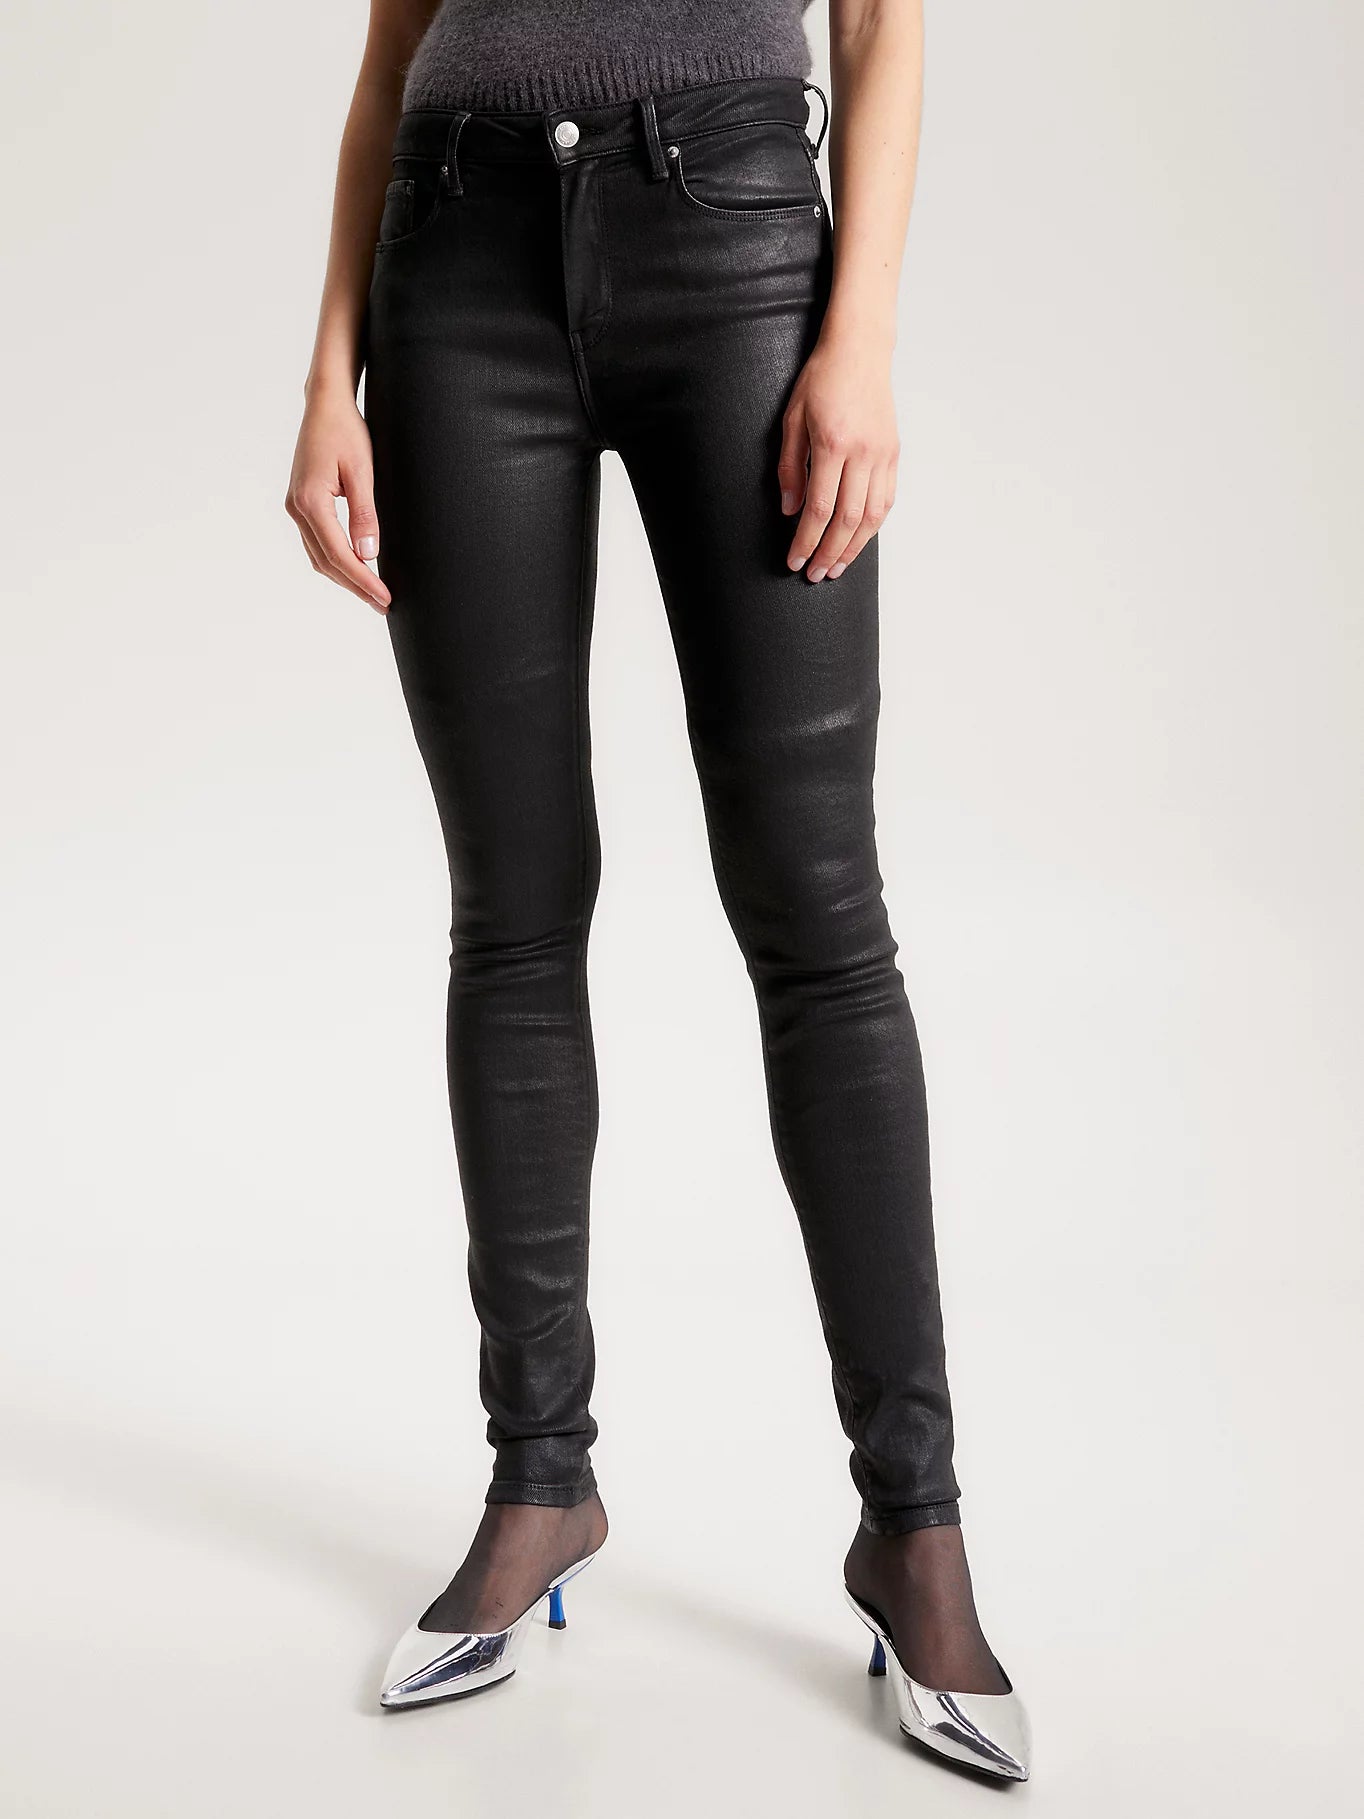 COATED TH FLEX BLACK JEANS